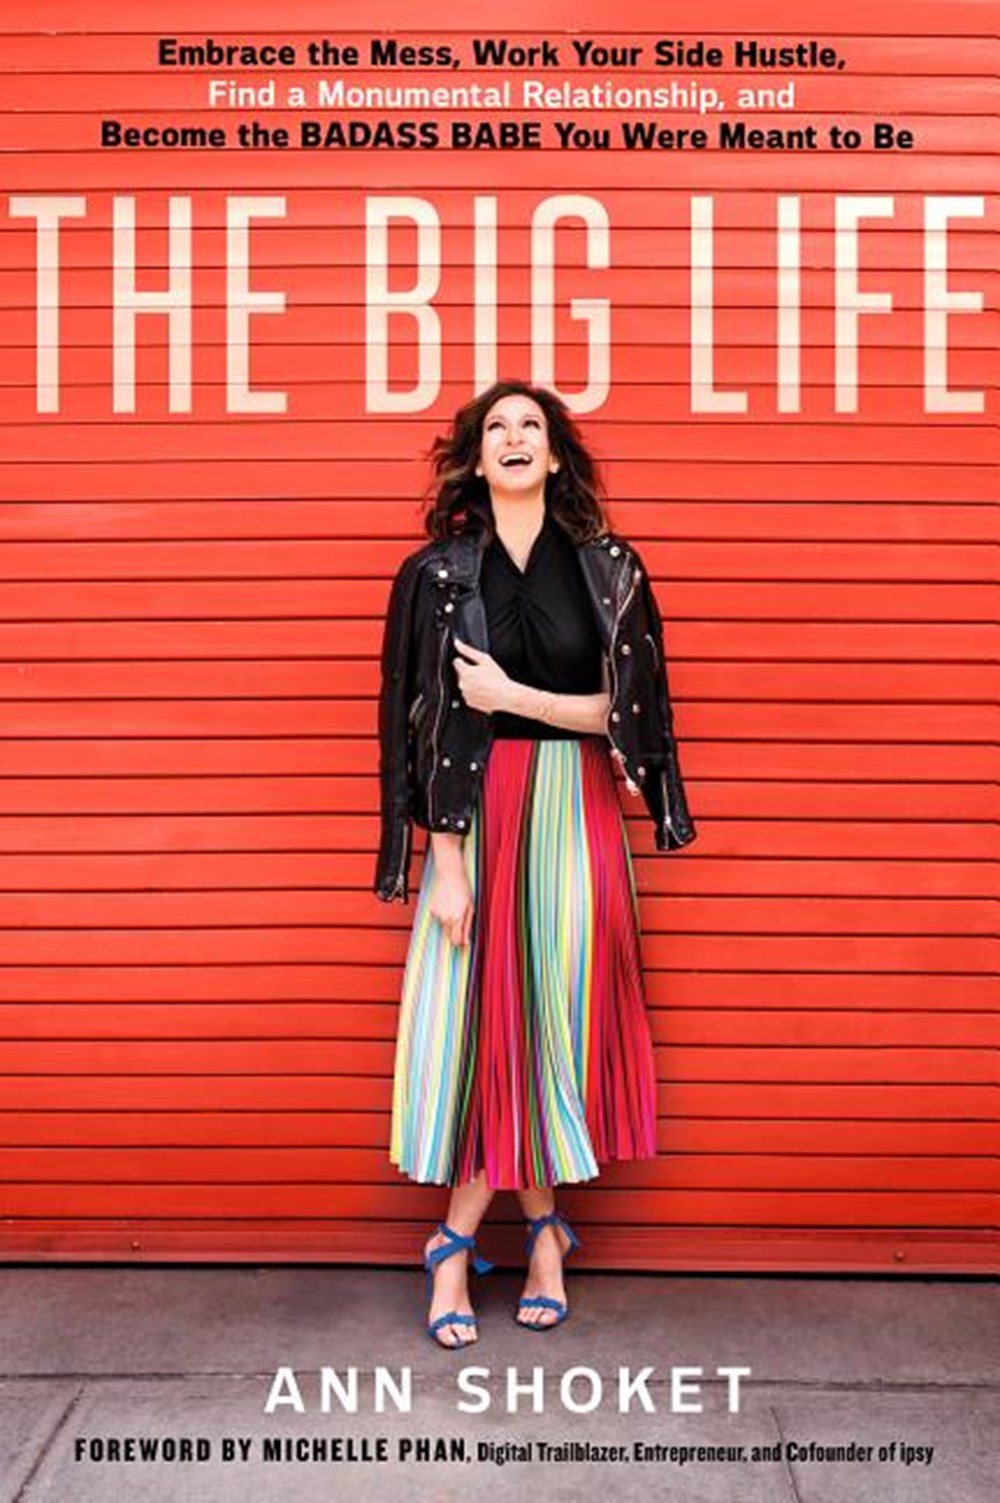 Big Life: Embrace the Mess, Work Your Side Hustle, Find a Monumental Relationship, and Become the Ba